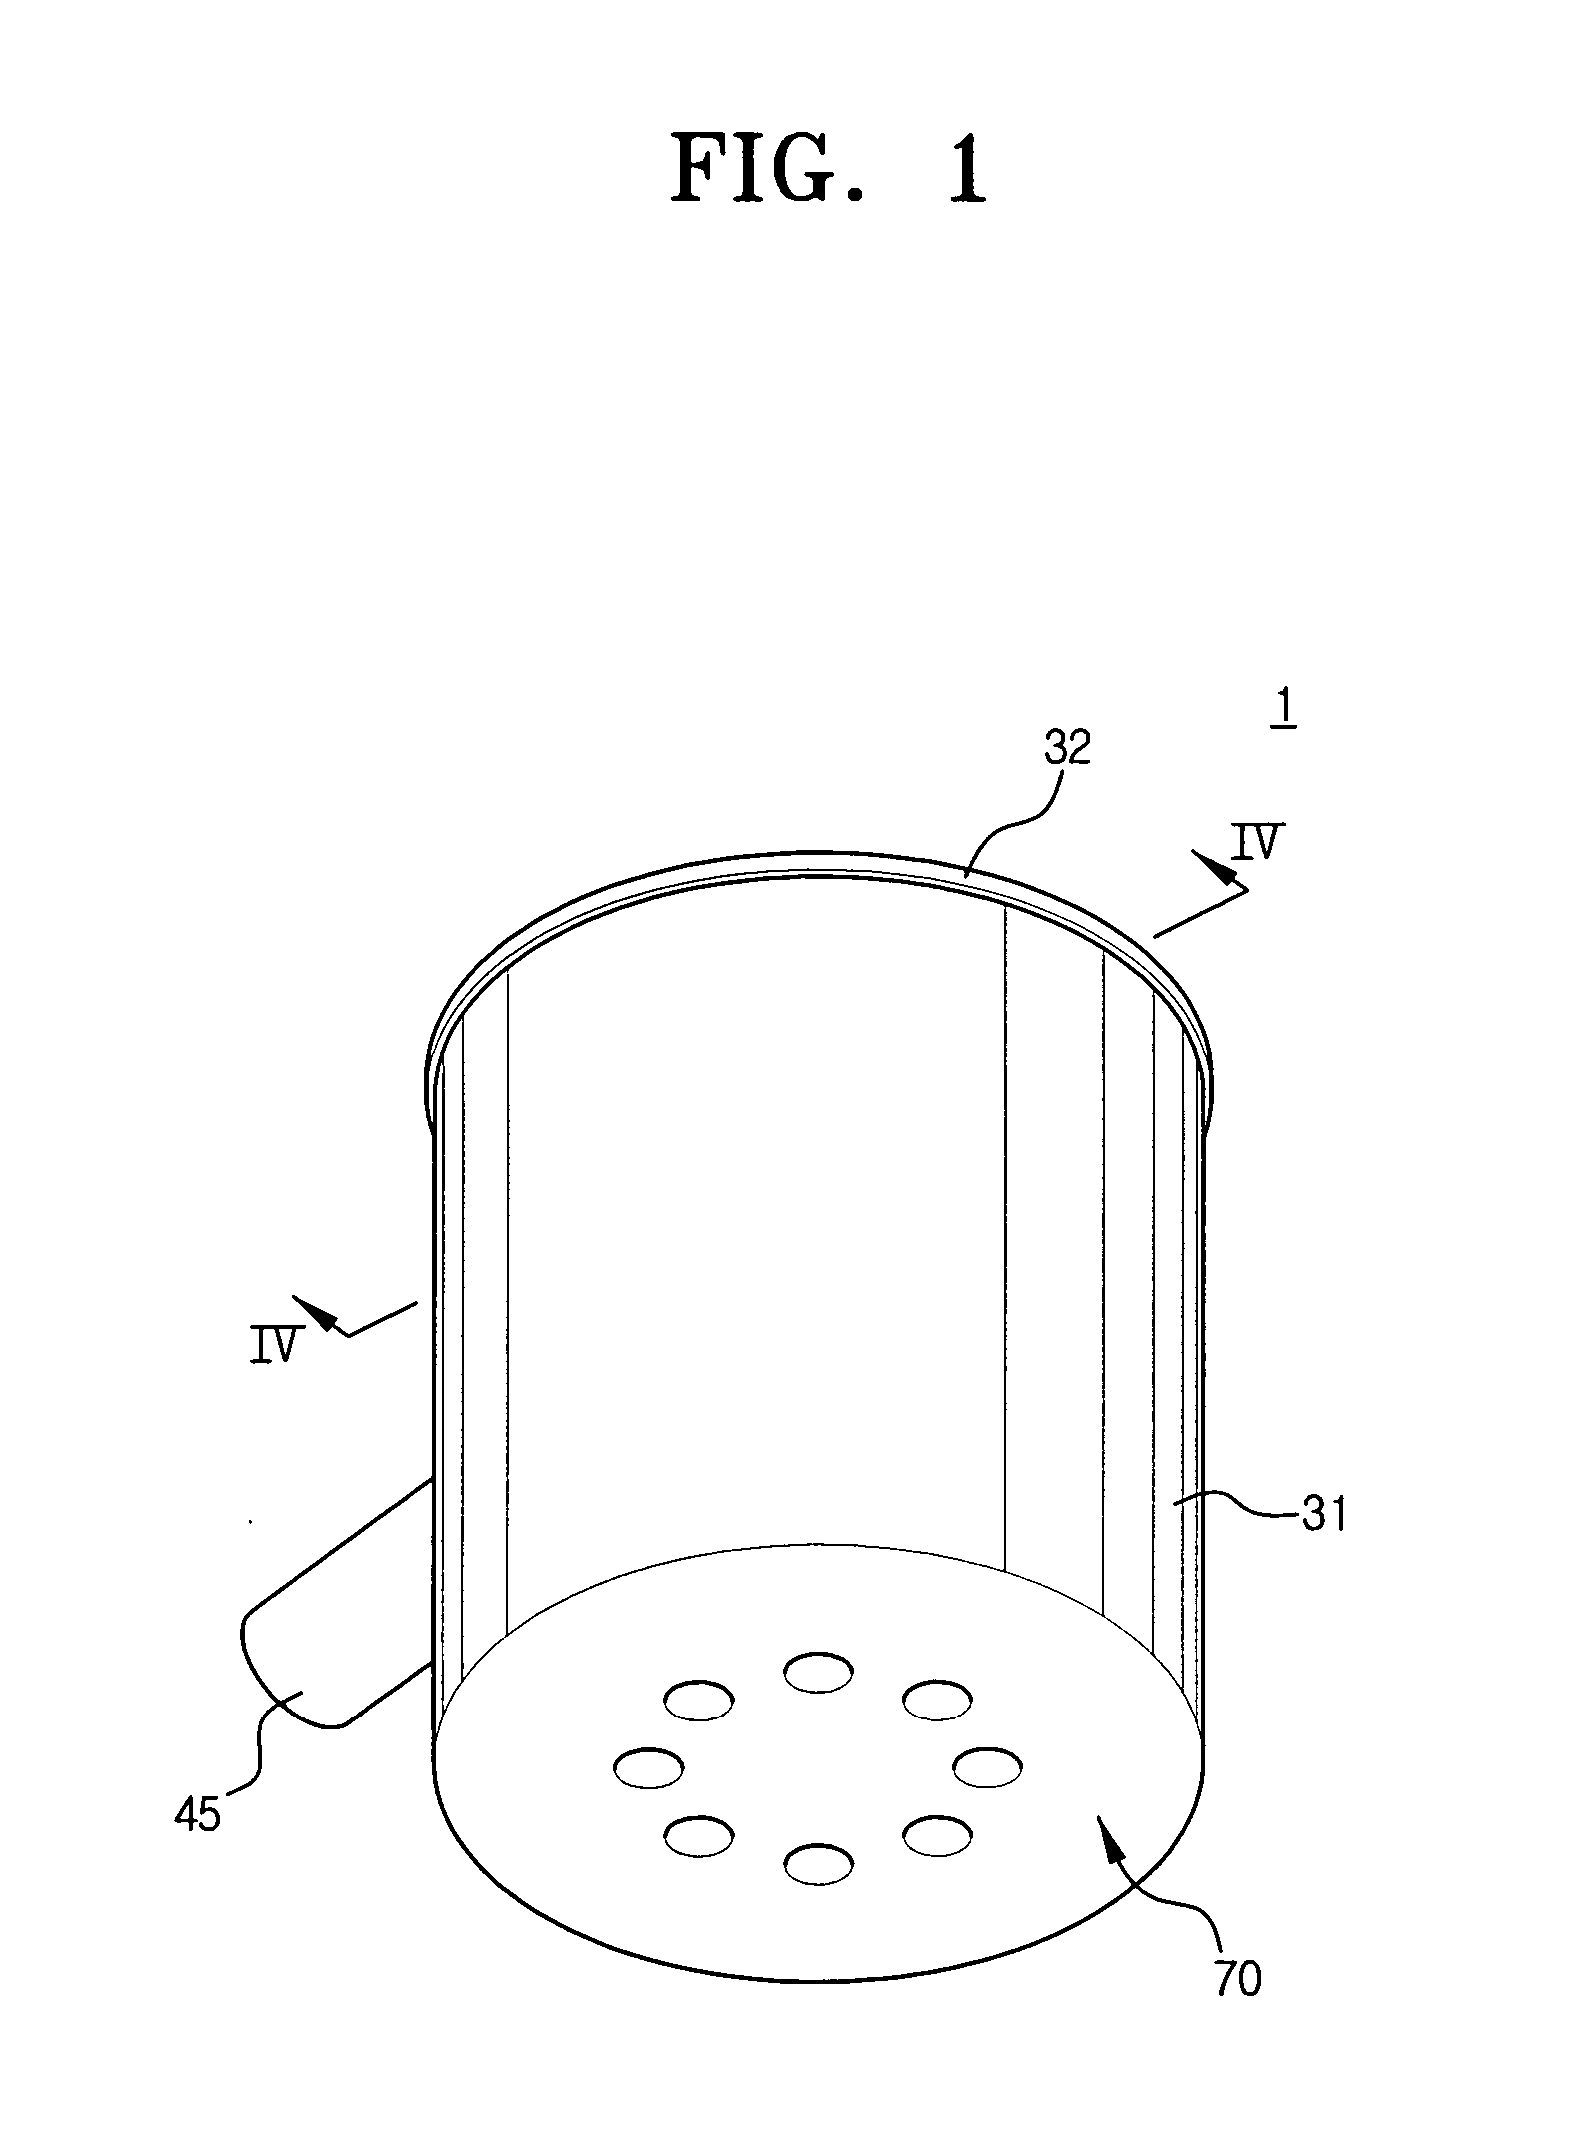 Multi-cyclone dust collector for vacuum cleaner